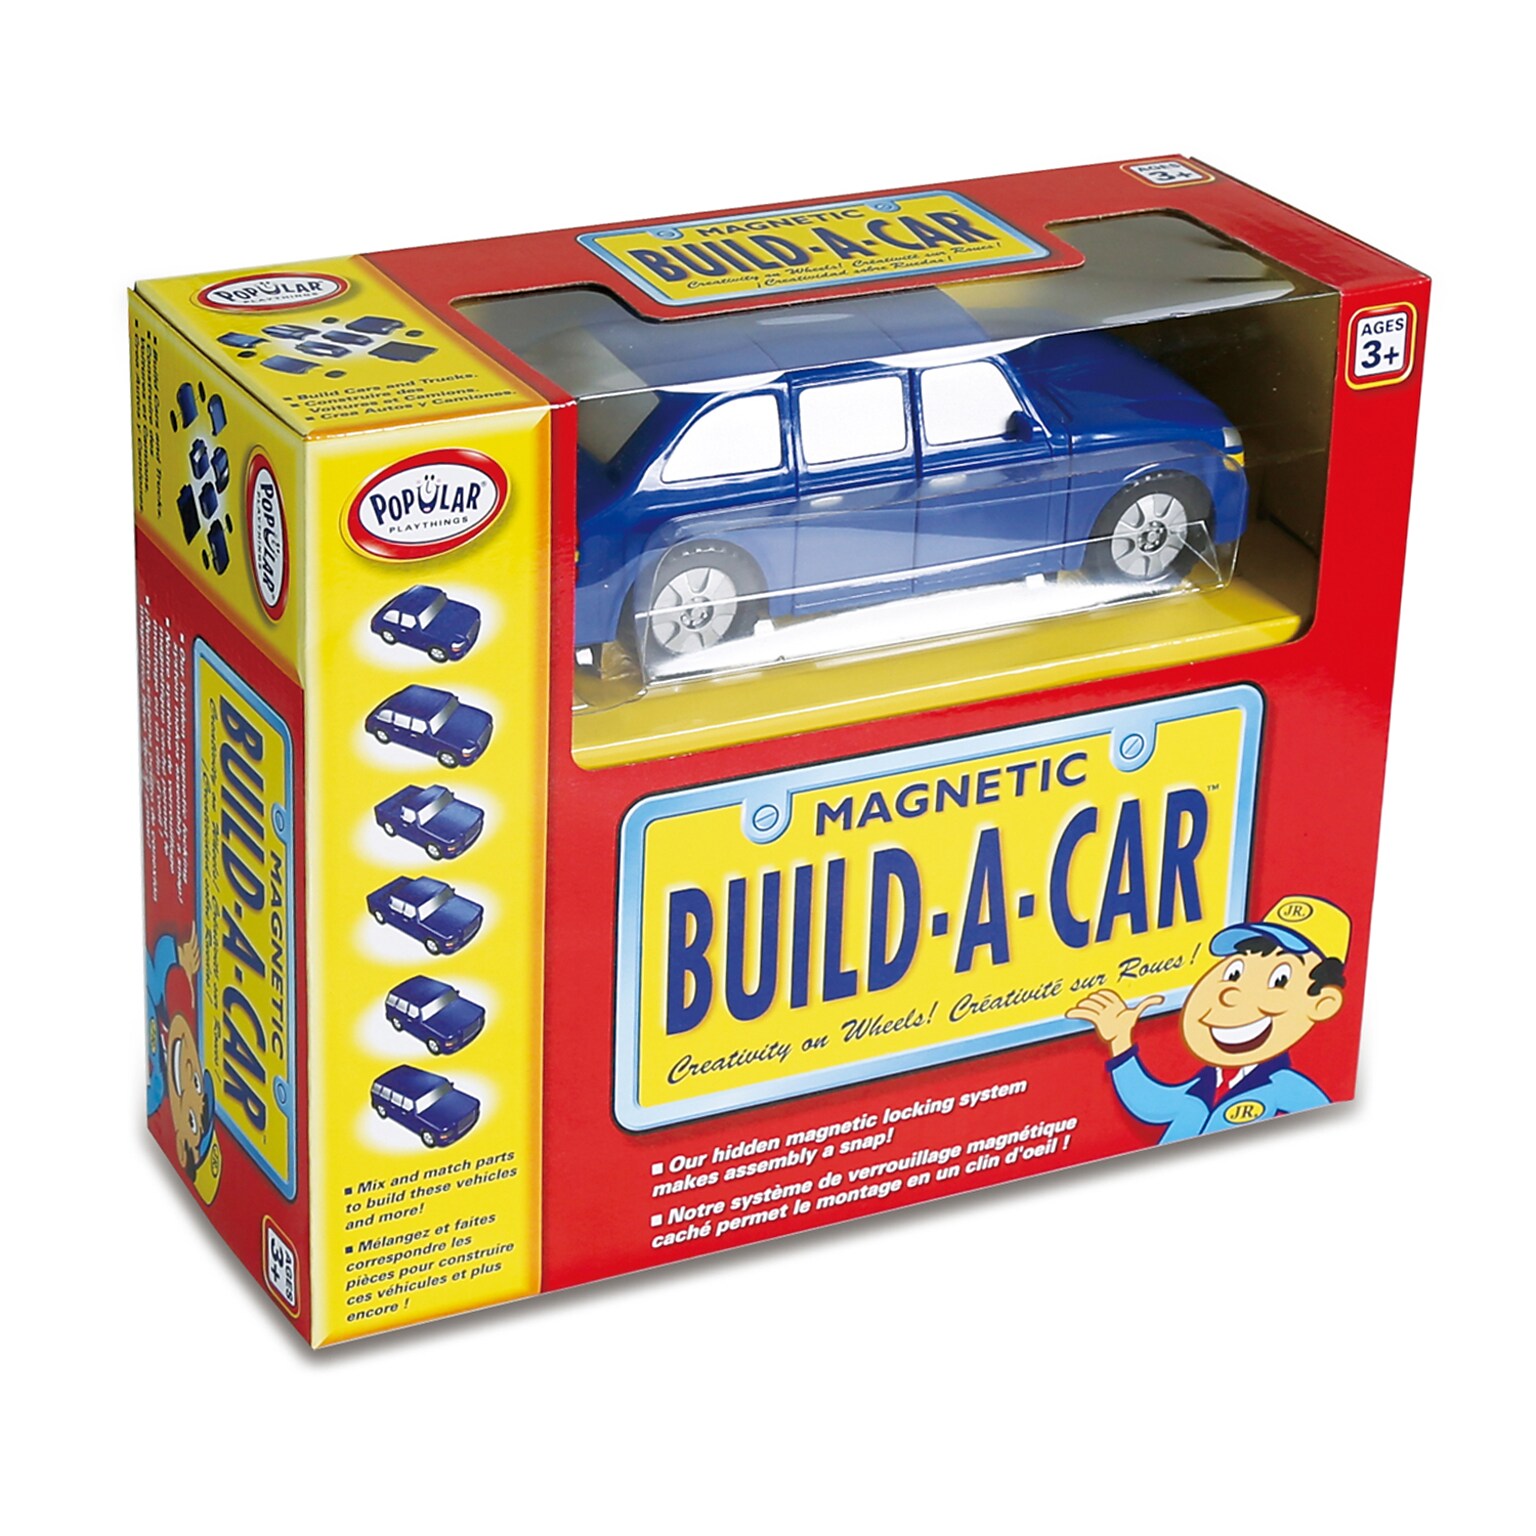 Popular Playthings Magnetic Build-A-Car (PPY60101)